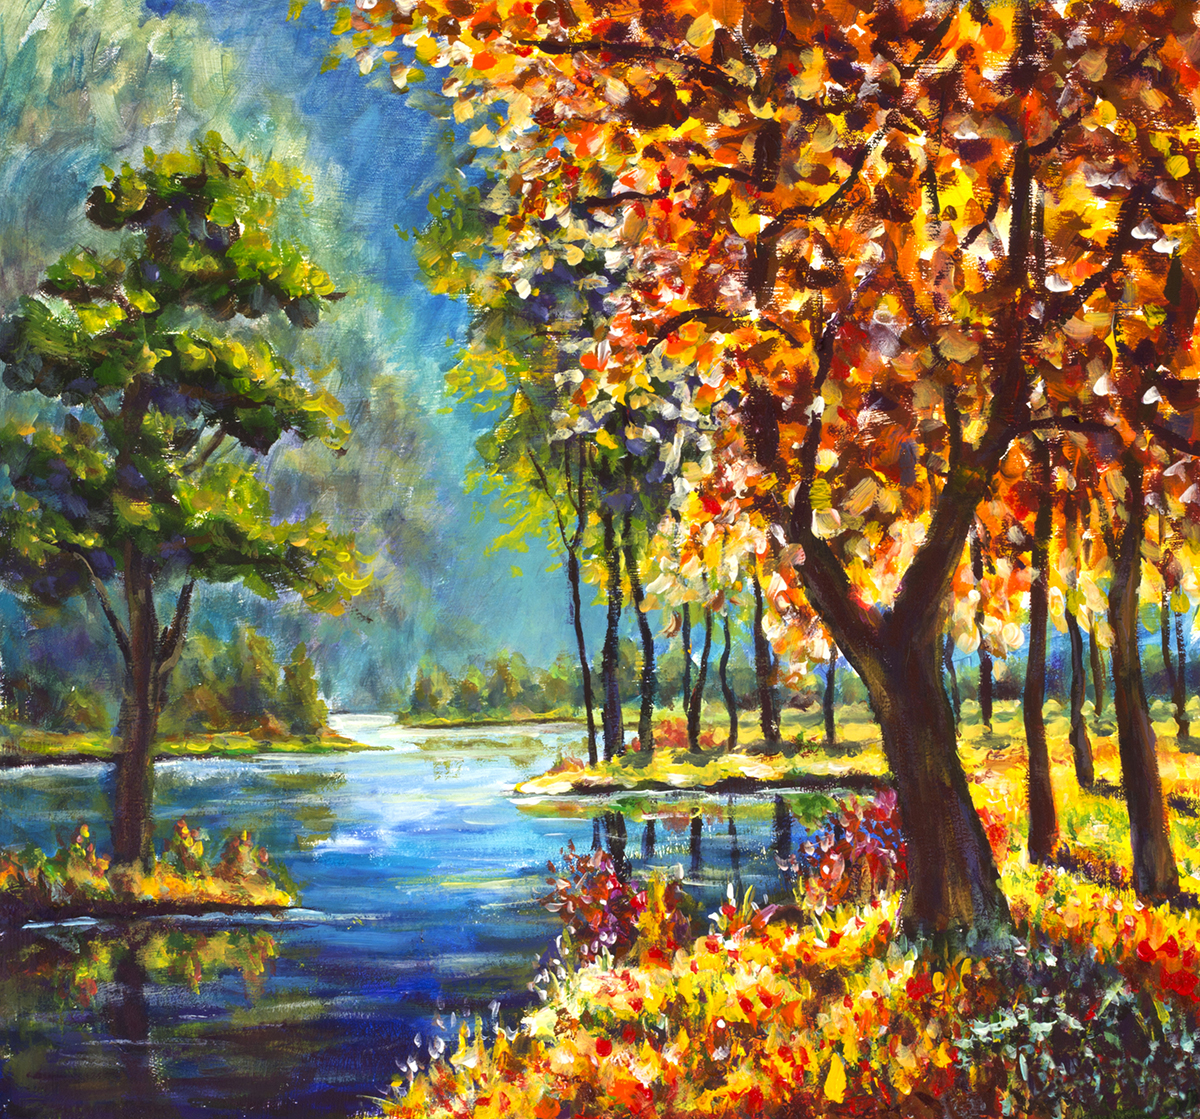 A painting of trees and a river